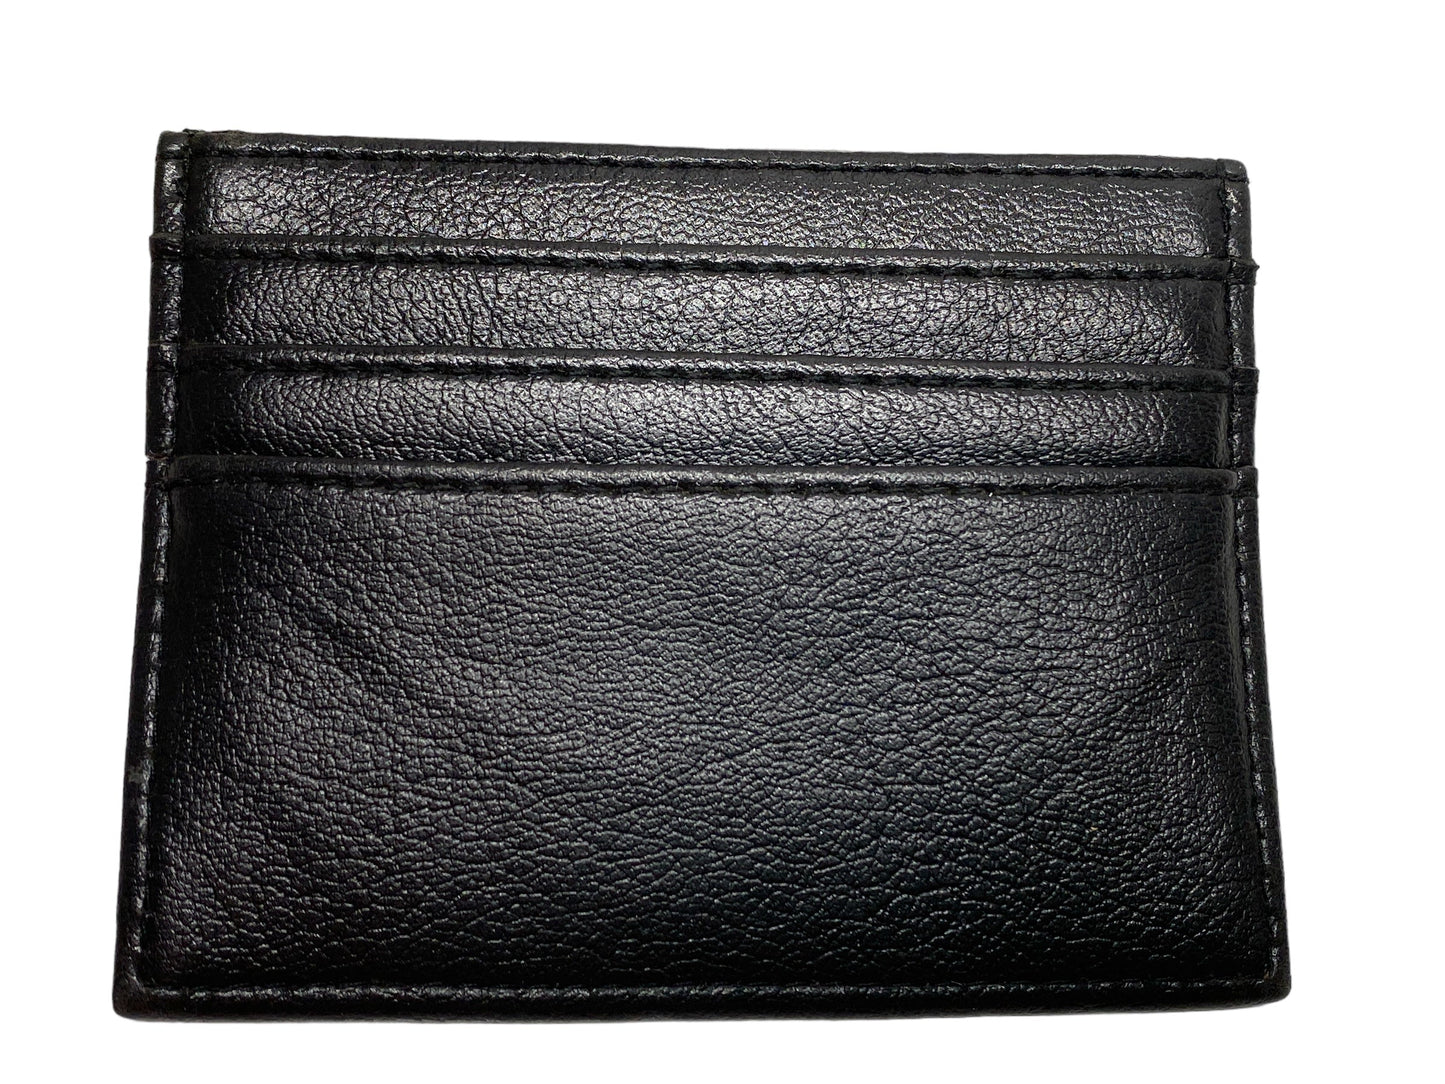 Wallet By Hugo Boss  Size: Small